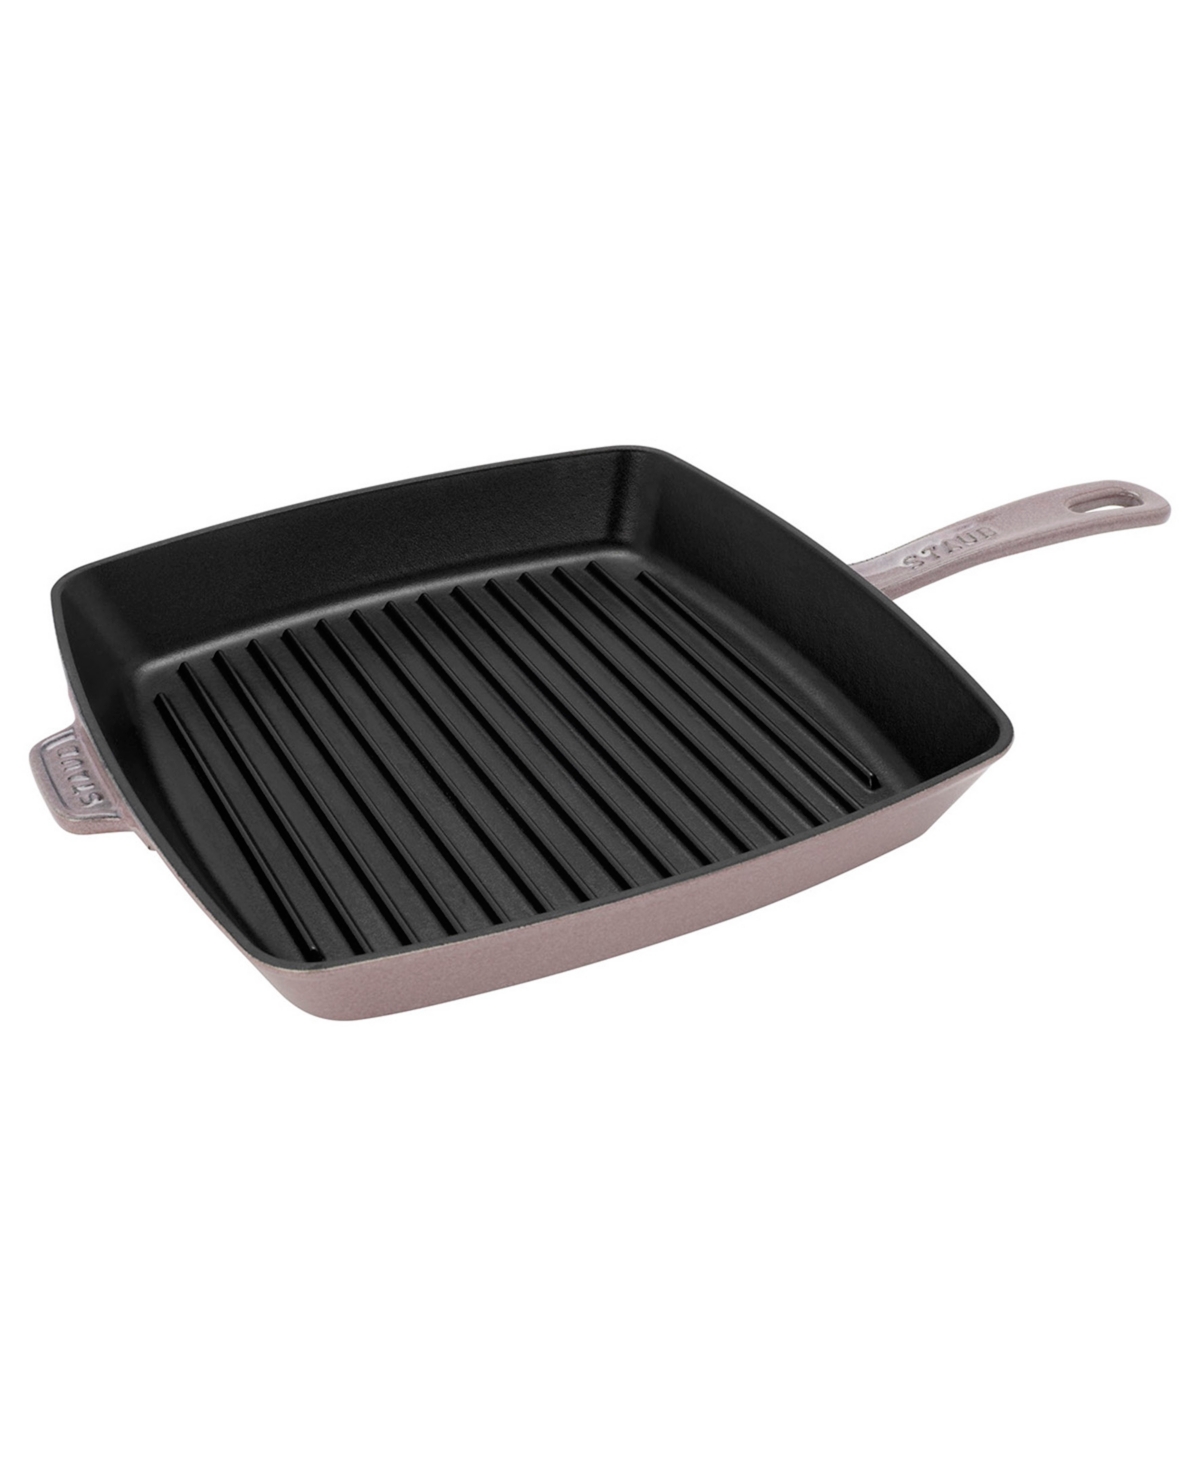 Shop Staub Cast Iron 12" Square Grill Pan In Lilac